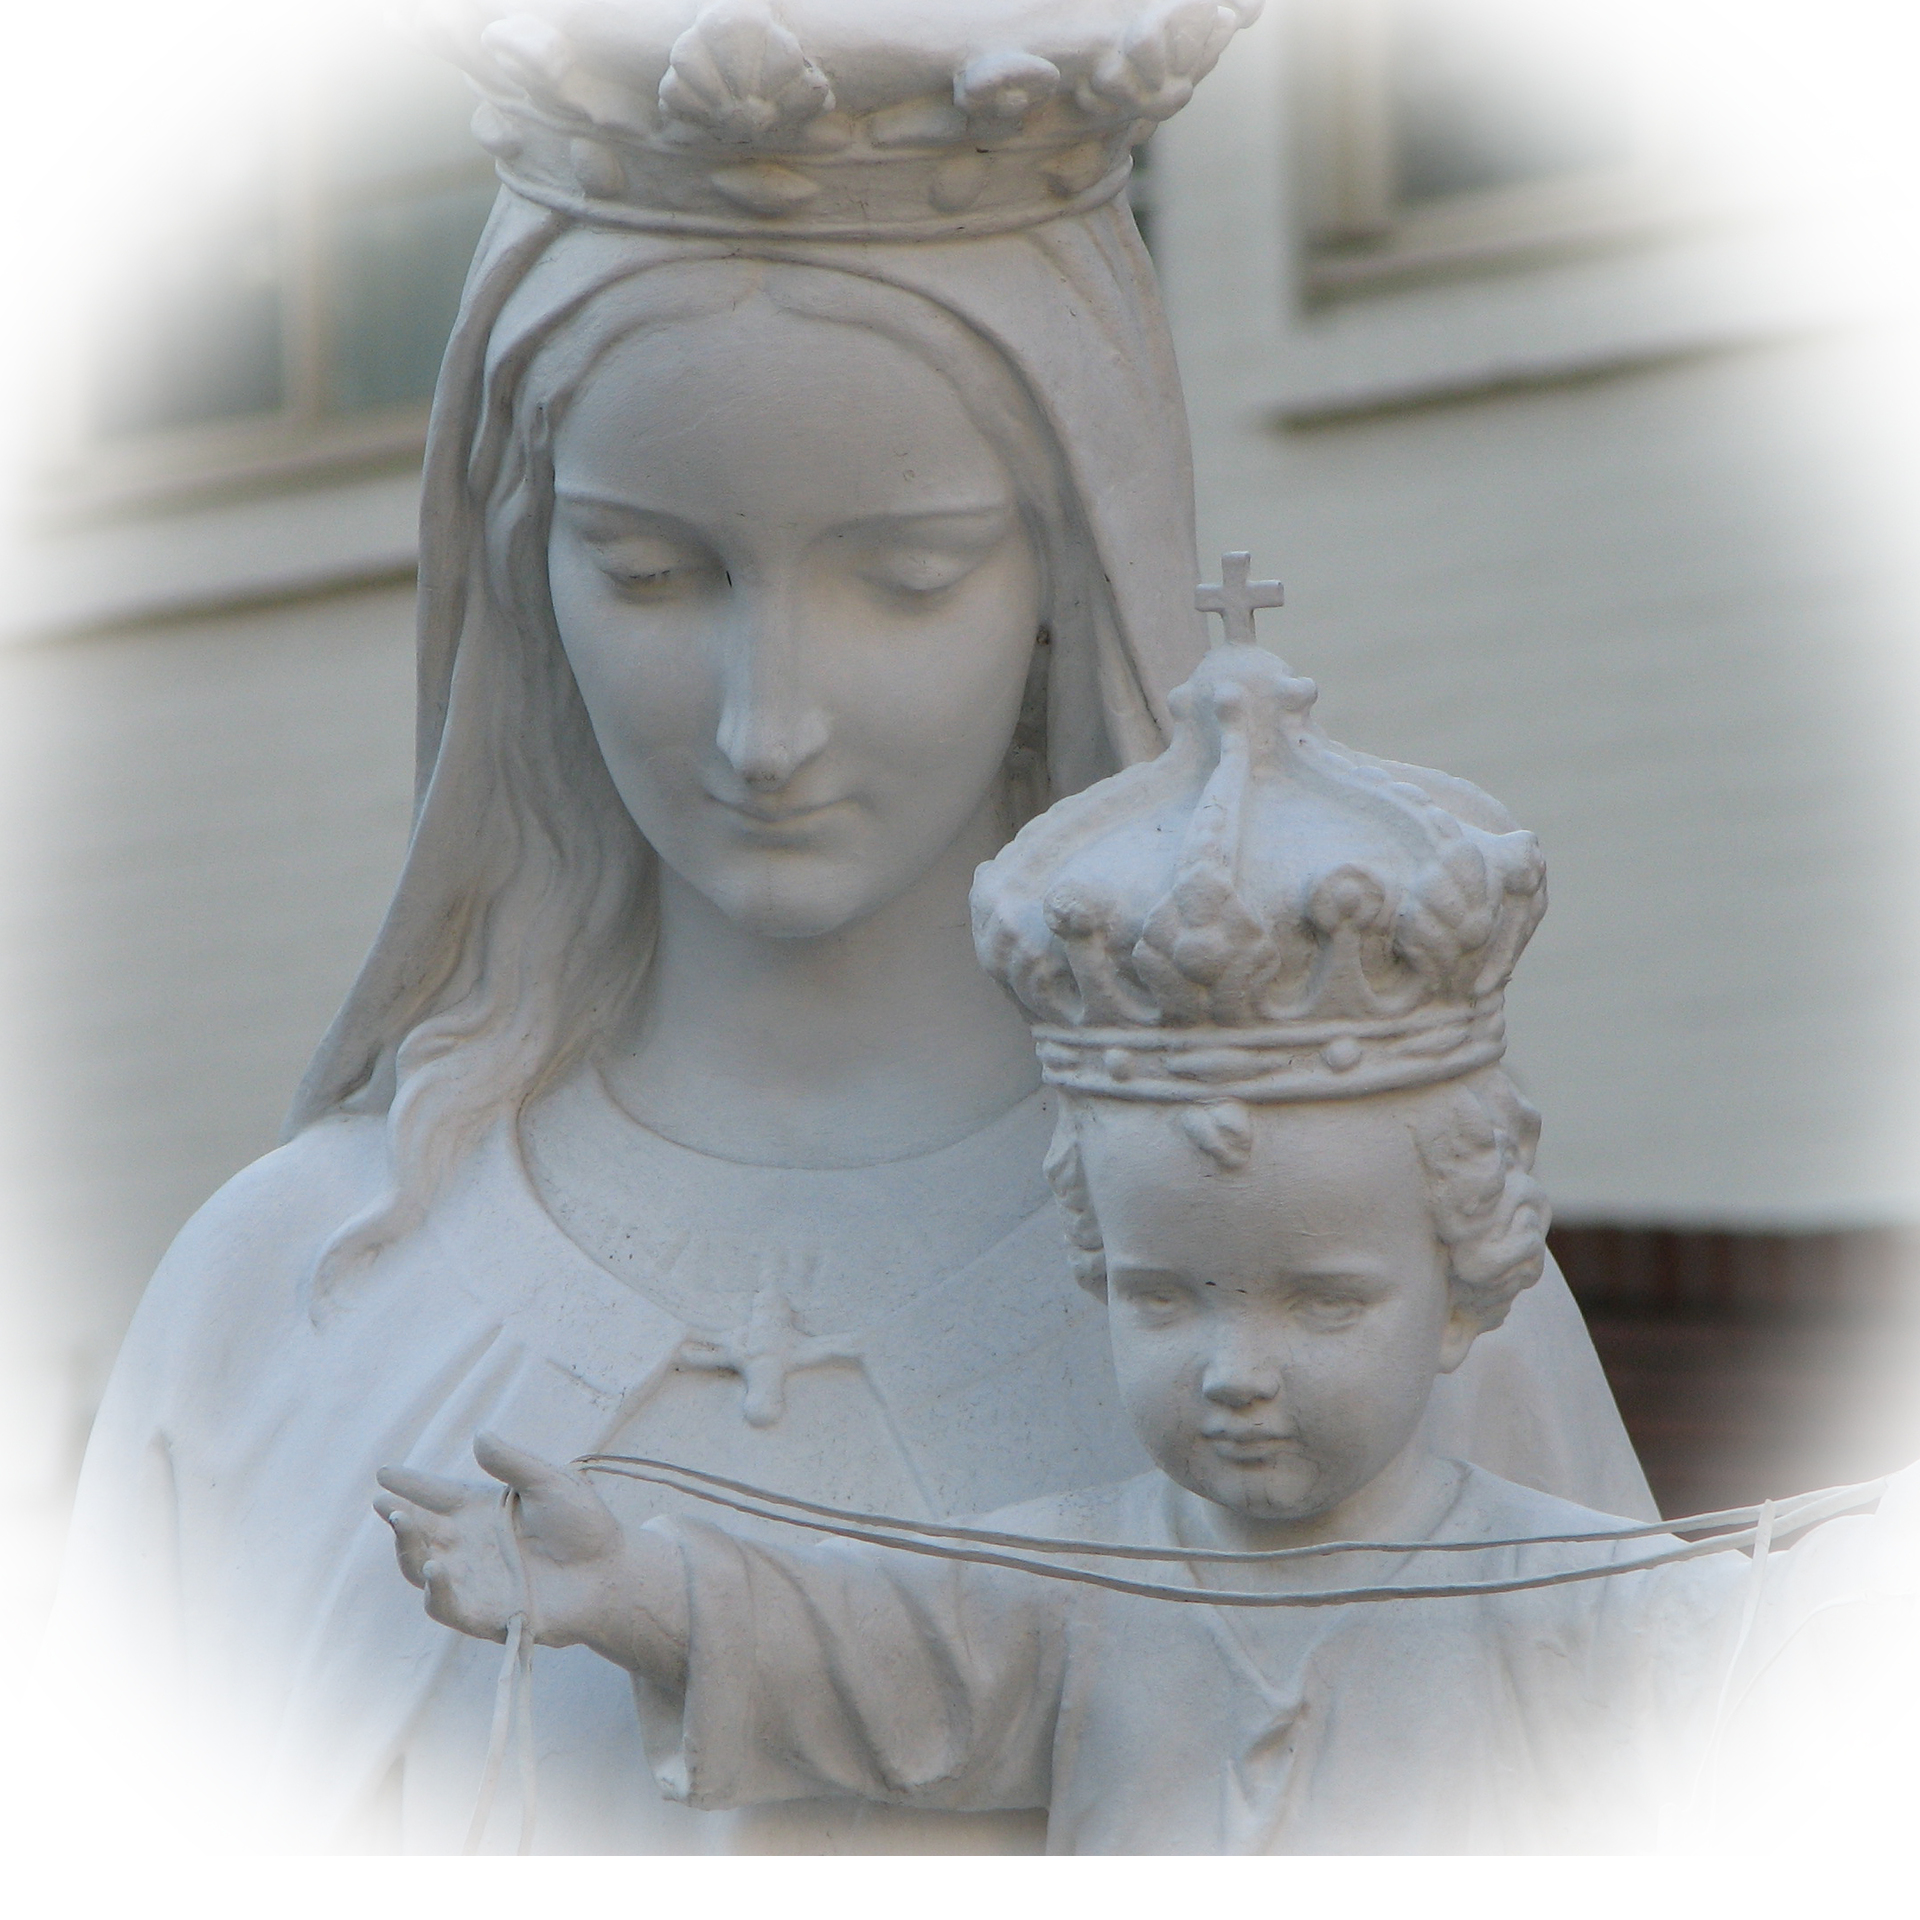 Our Lady of Mount Carmel Statue